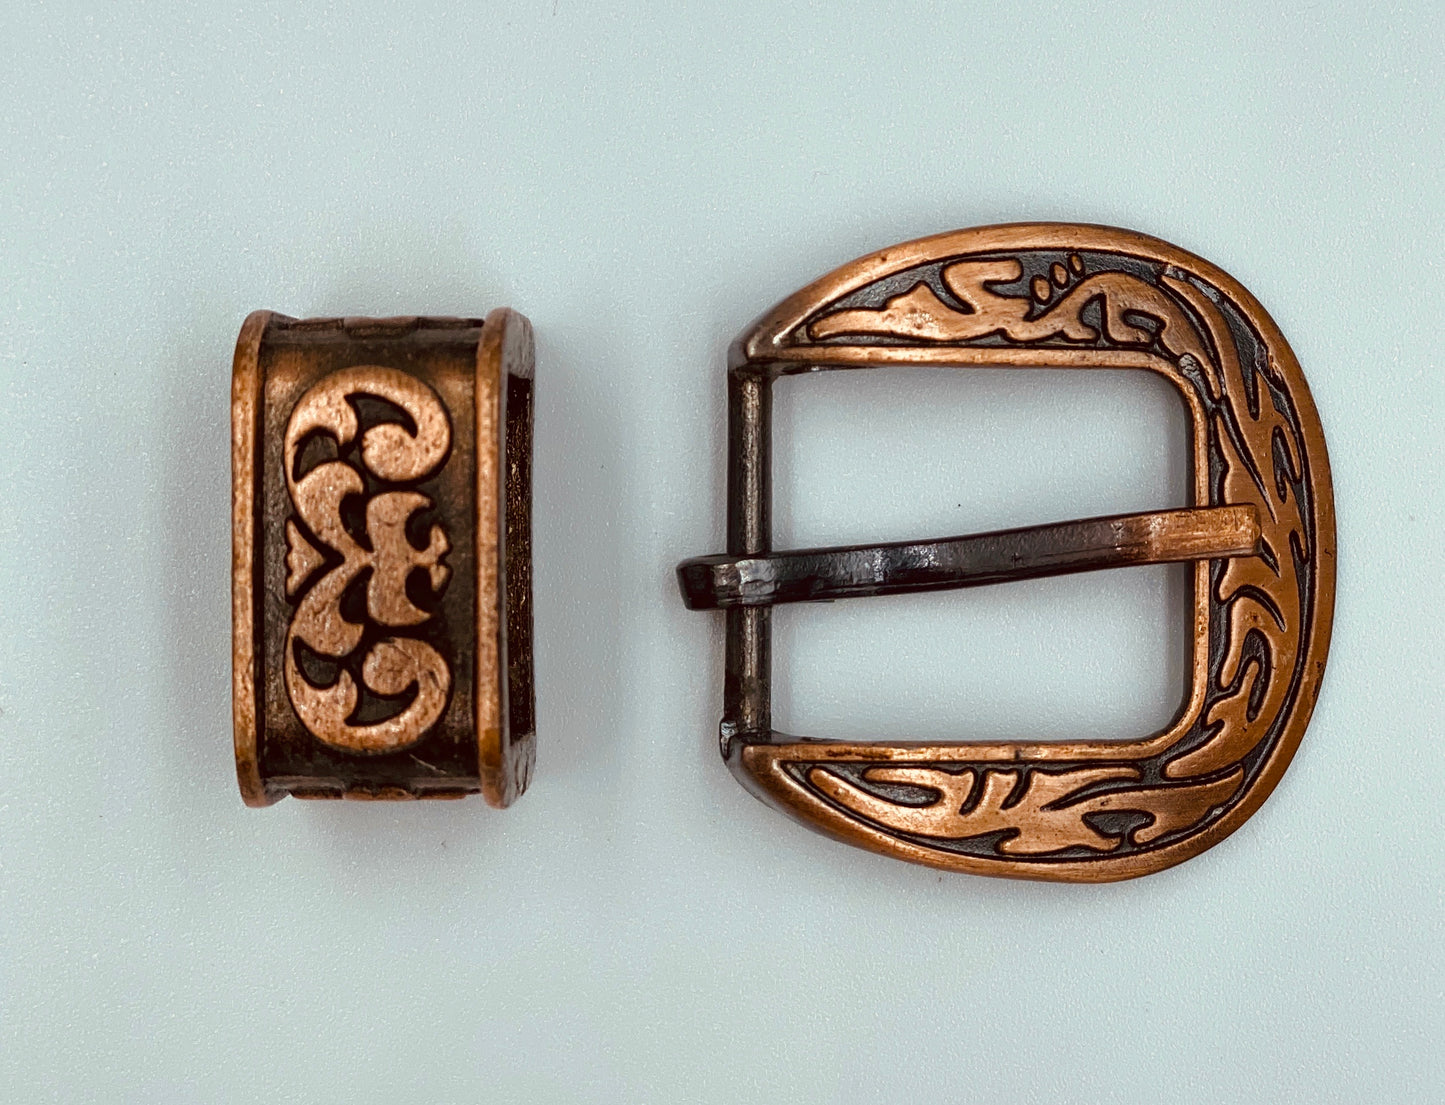 A7374 - Antique Copper Buckle & Keeper